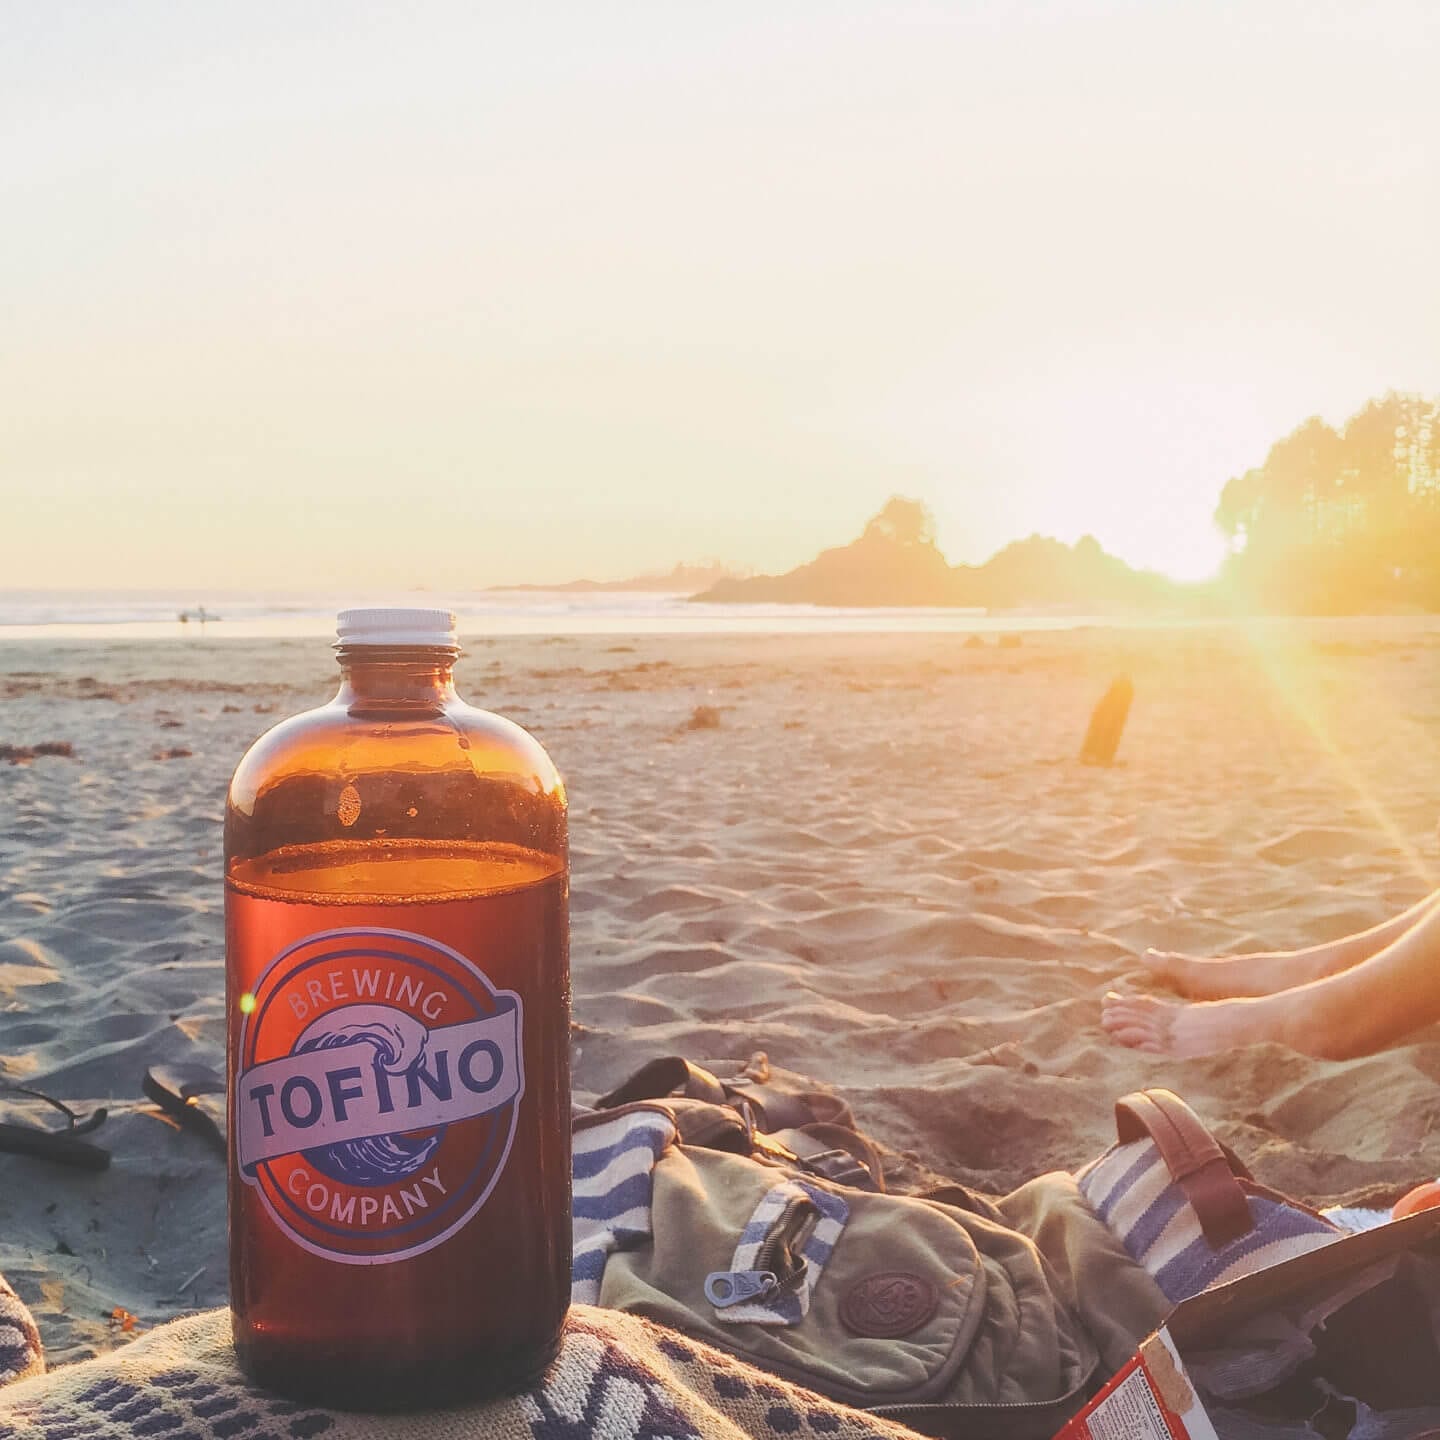 A growler of beer from Tofino Brewing Co. on the beach at sunset 